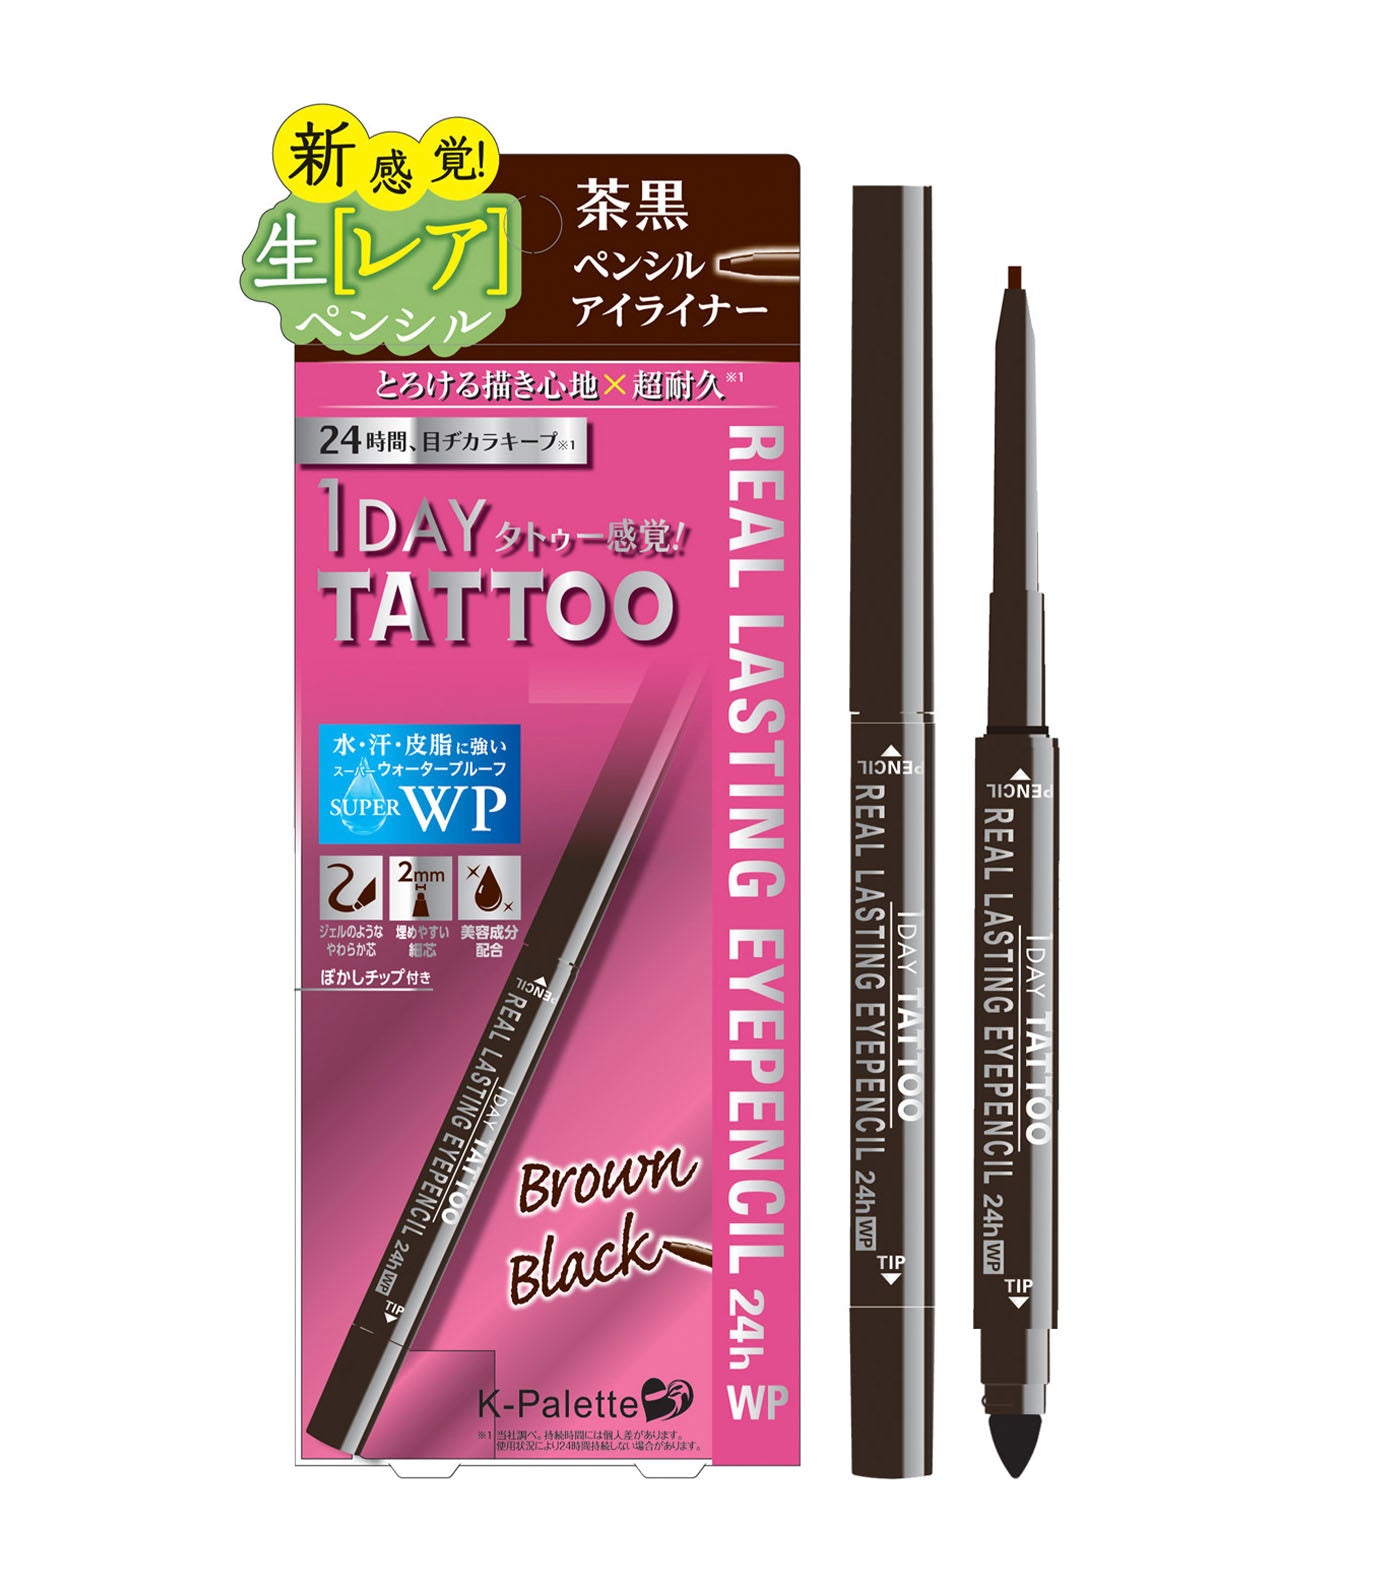 k-palette brown black 1 day tattoo real lasting eyepencil